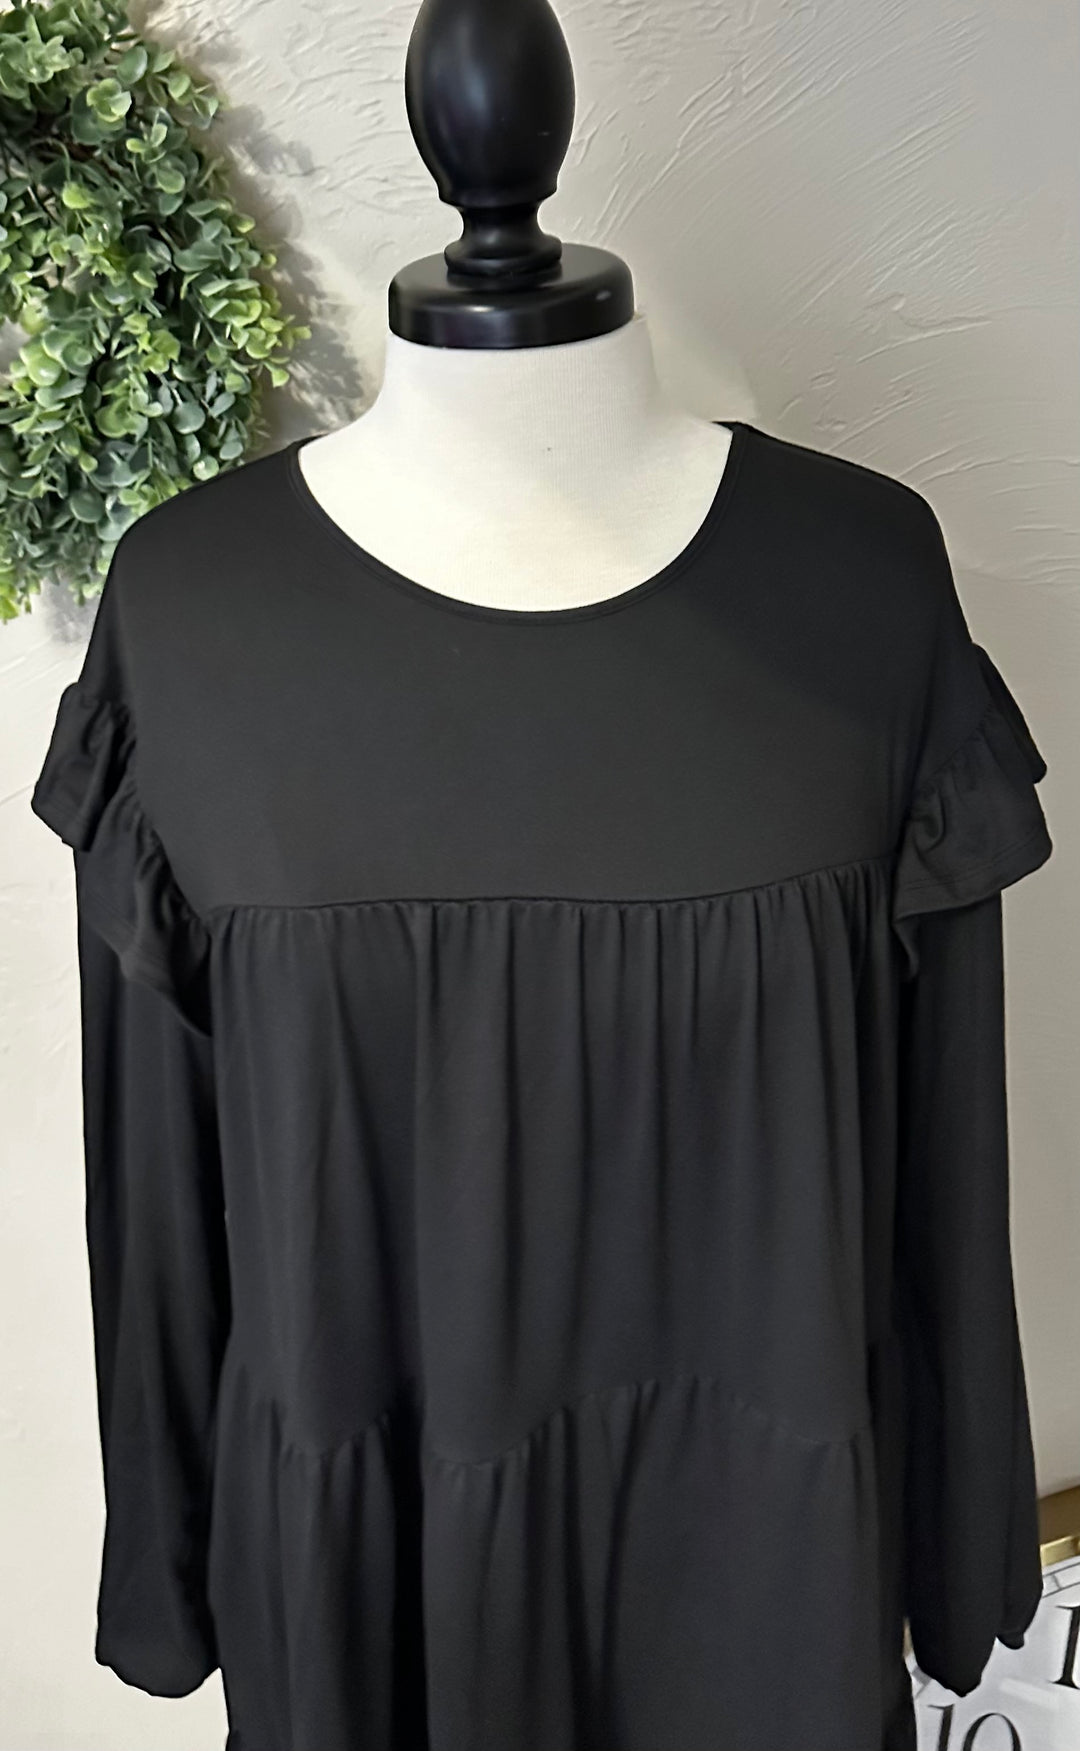 Women's Black Tiered Tunic Top with Sleeve Detail on Long Sleeves